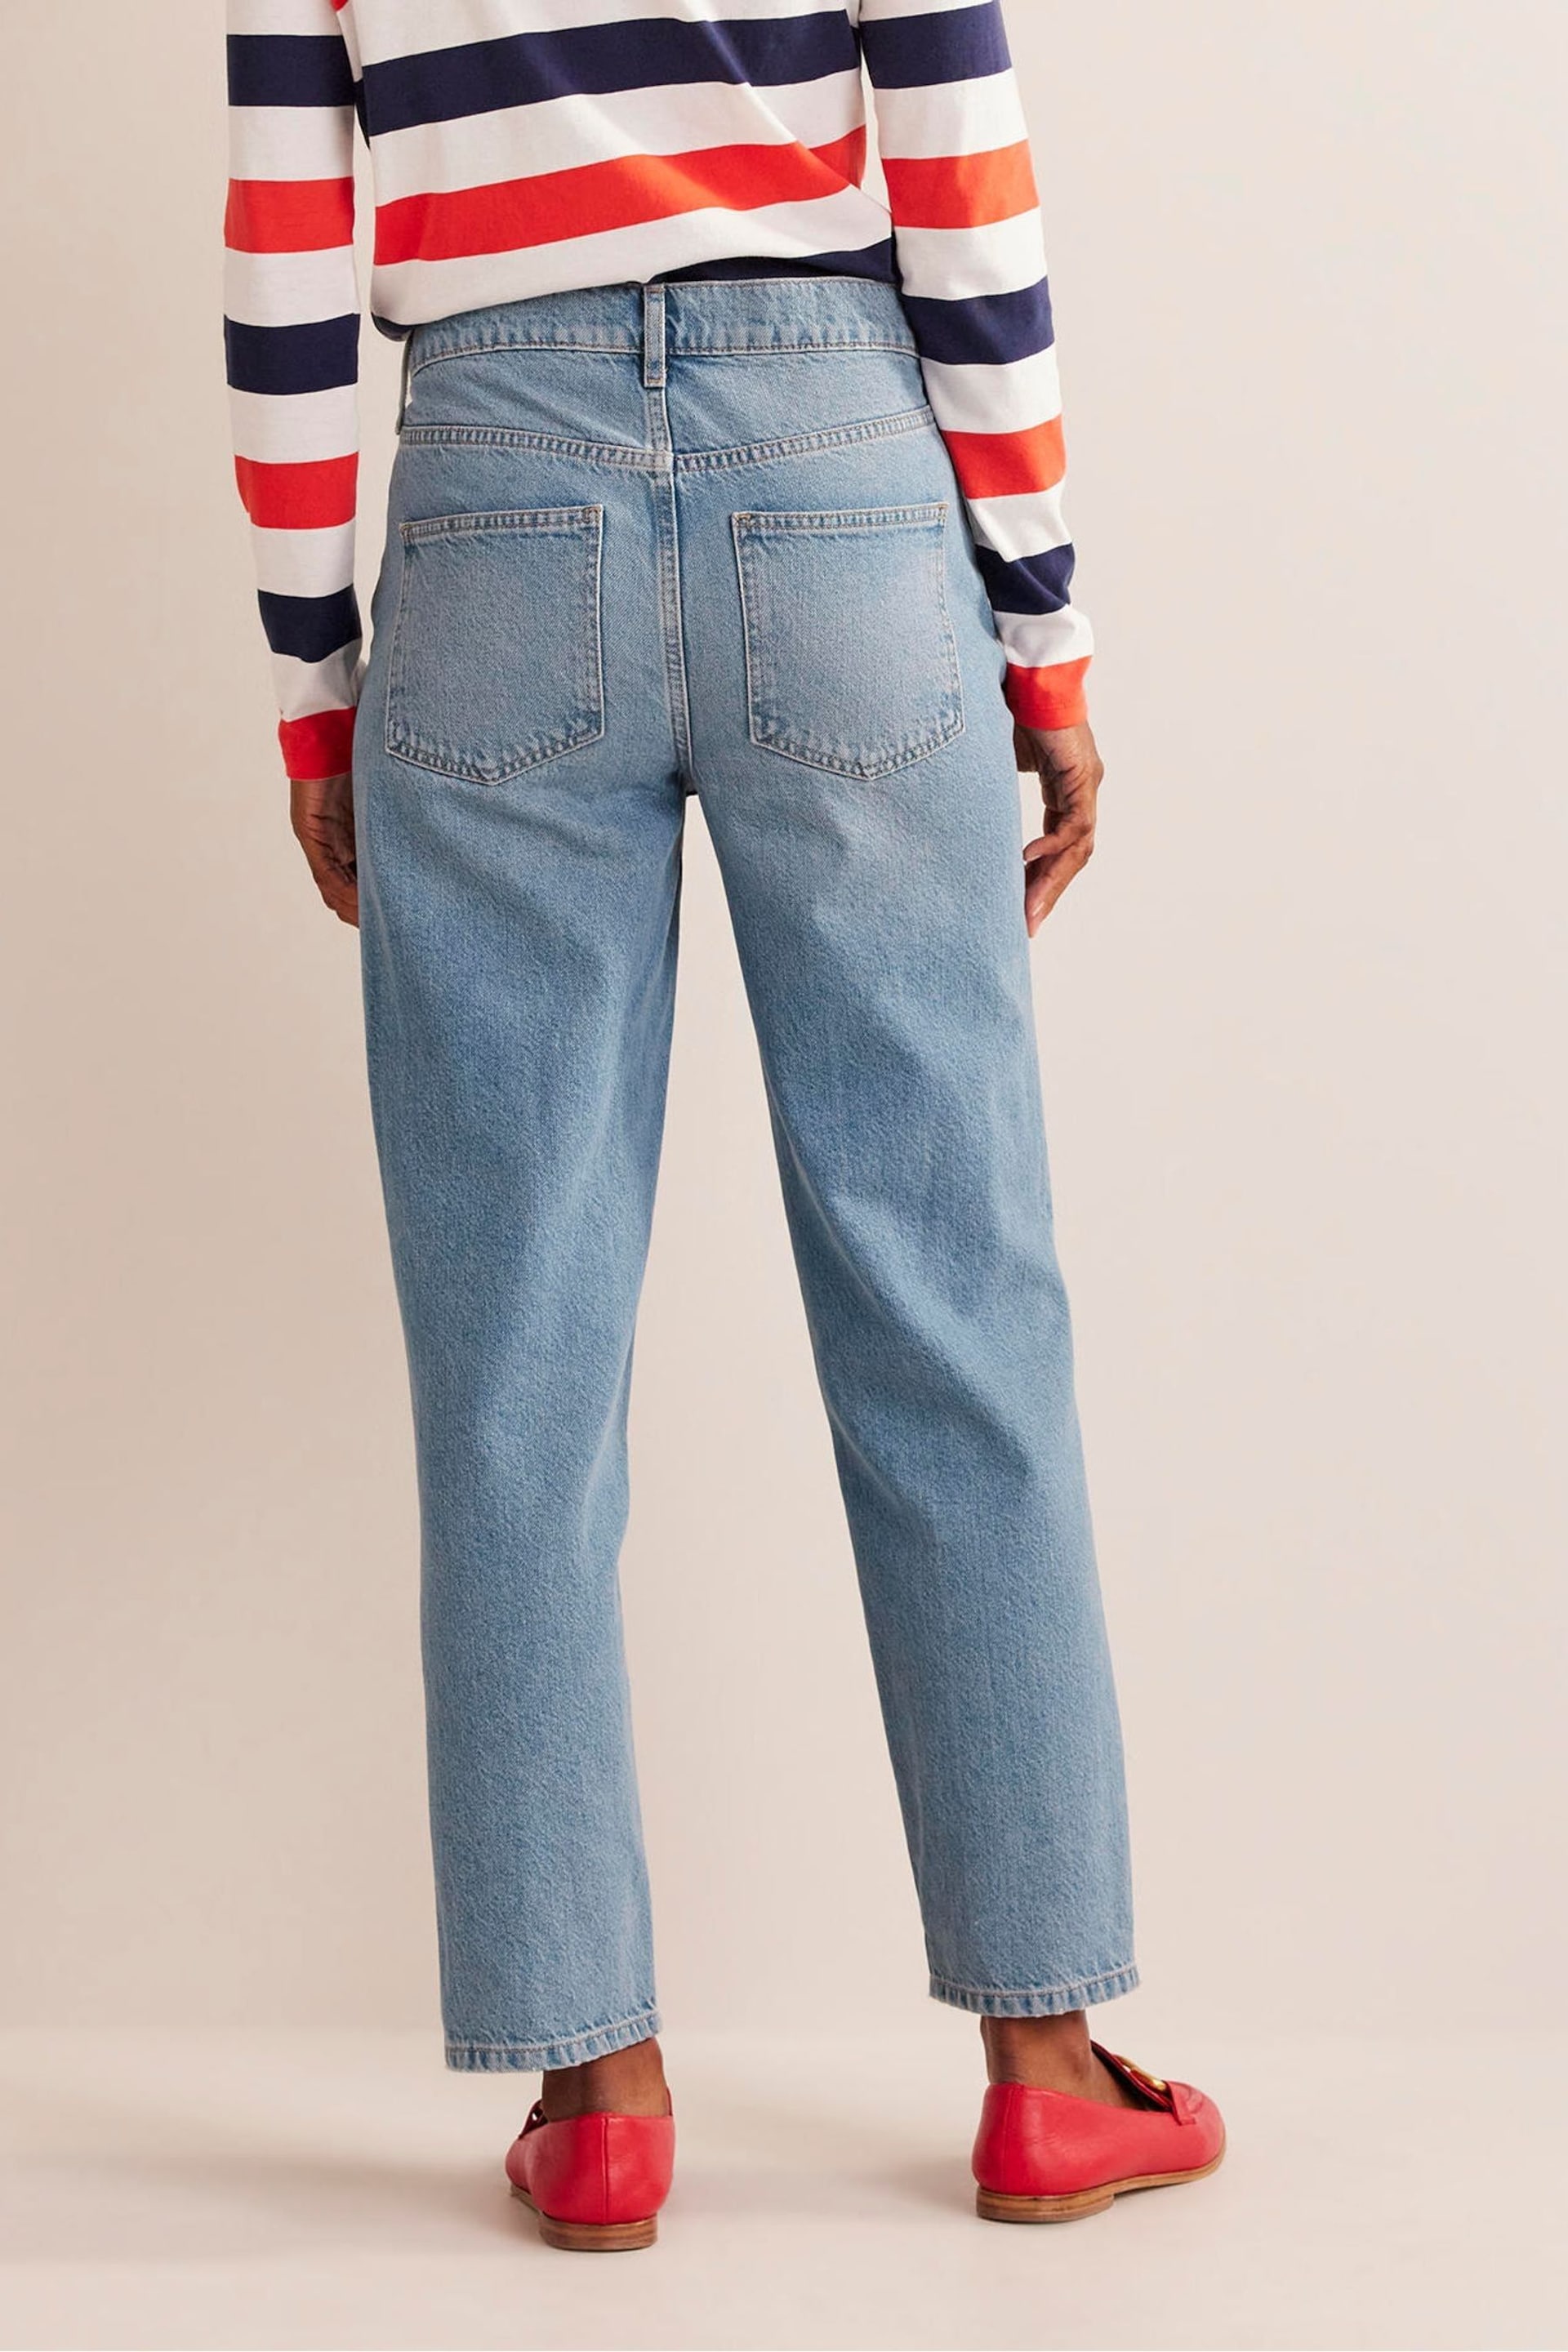 Boden Light Blue Mid Rise Tapered Jeans - Image 3 of 8